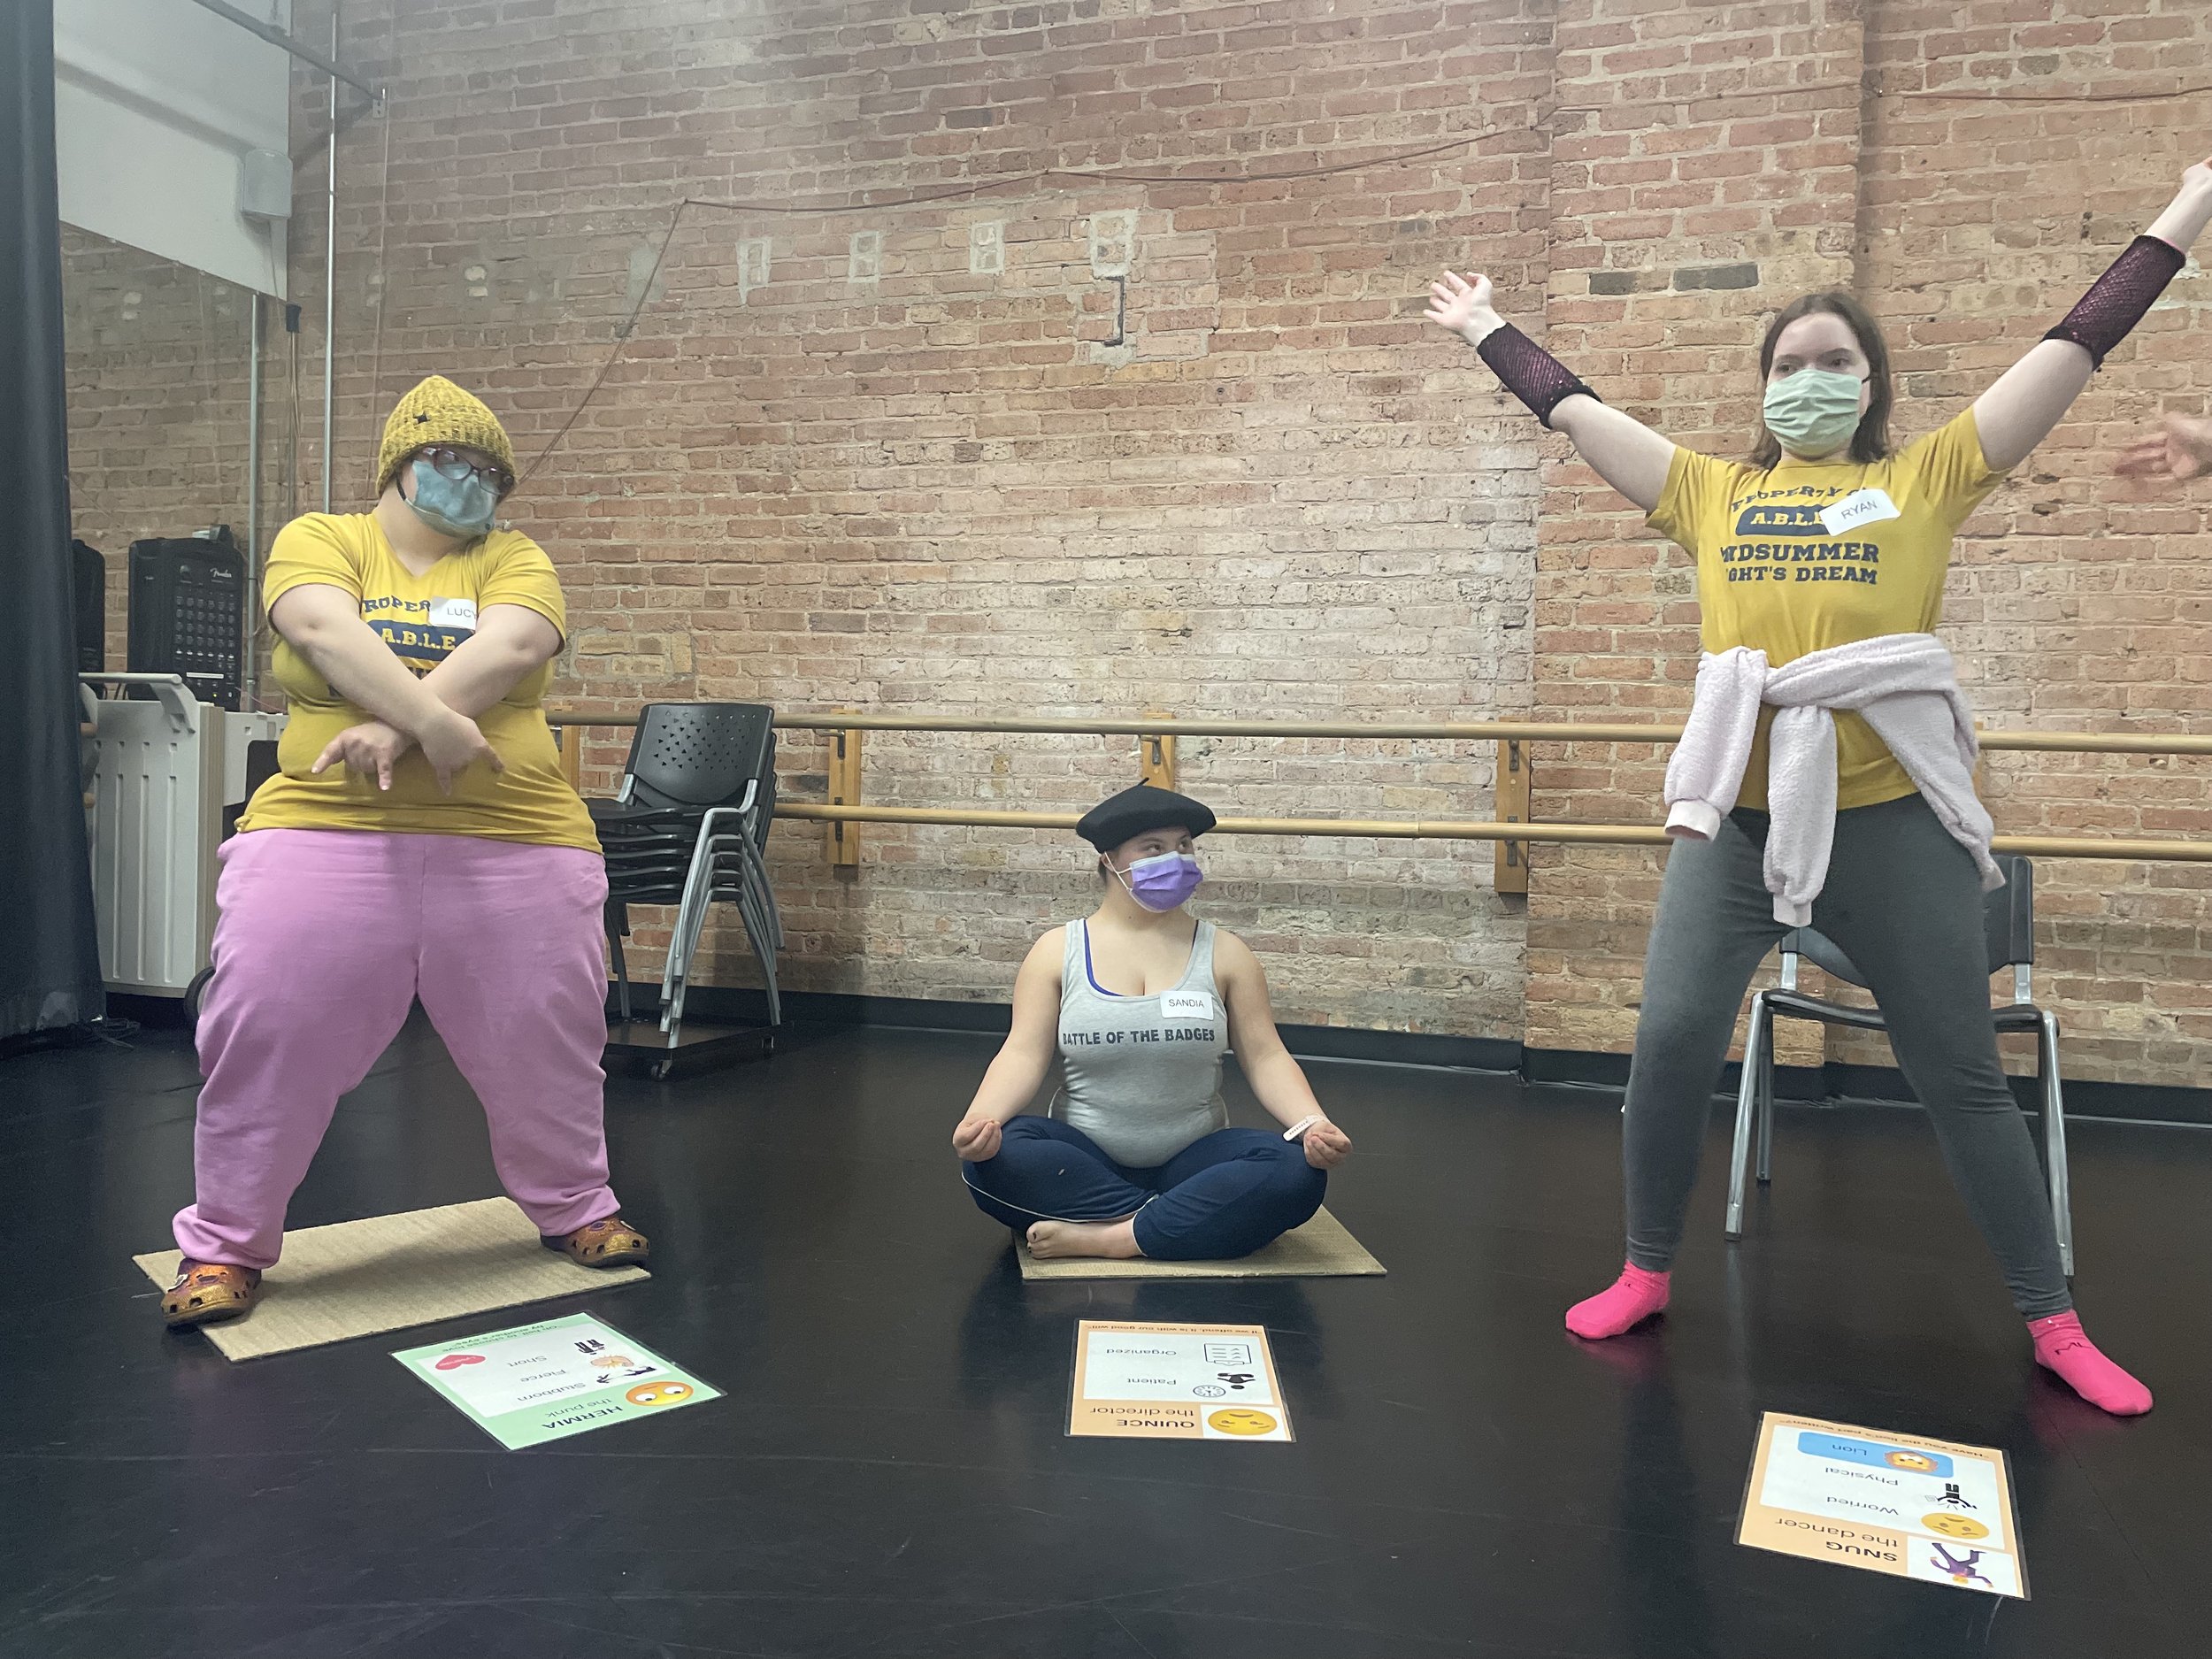  Throughout the process, actors had the chance to try several different characters to see which resonated with them the most. Here, actors Lucy Walsh, Sandia Coleman, and Ryan Foley come up with signature poses for different characters in a rehearsal